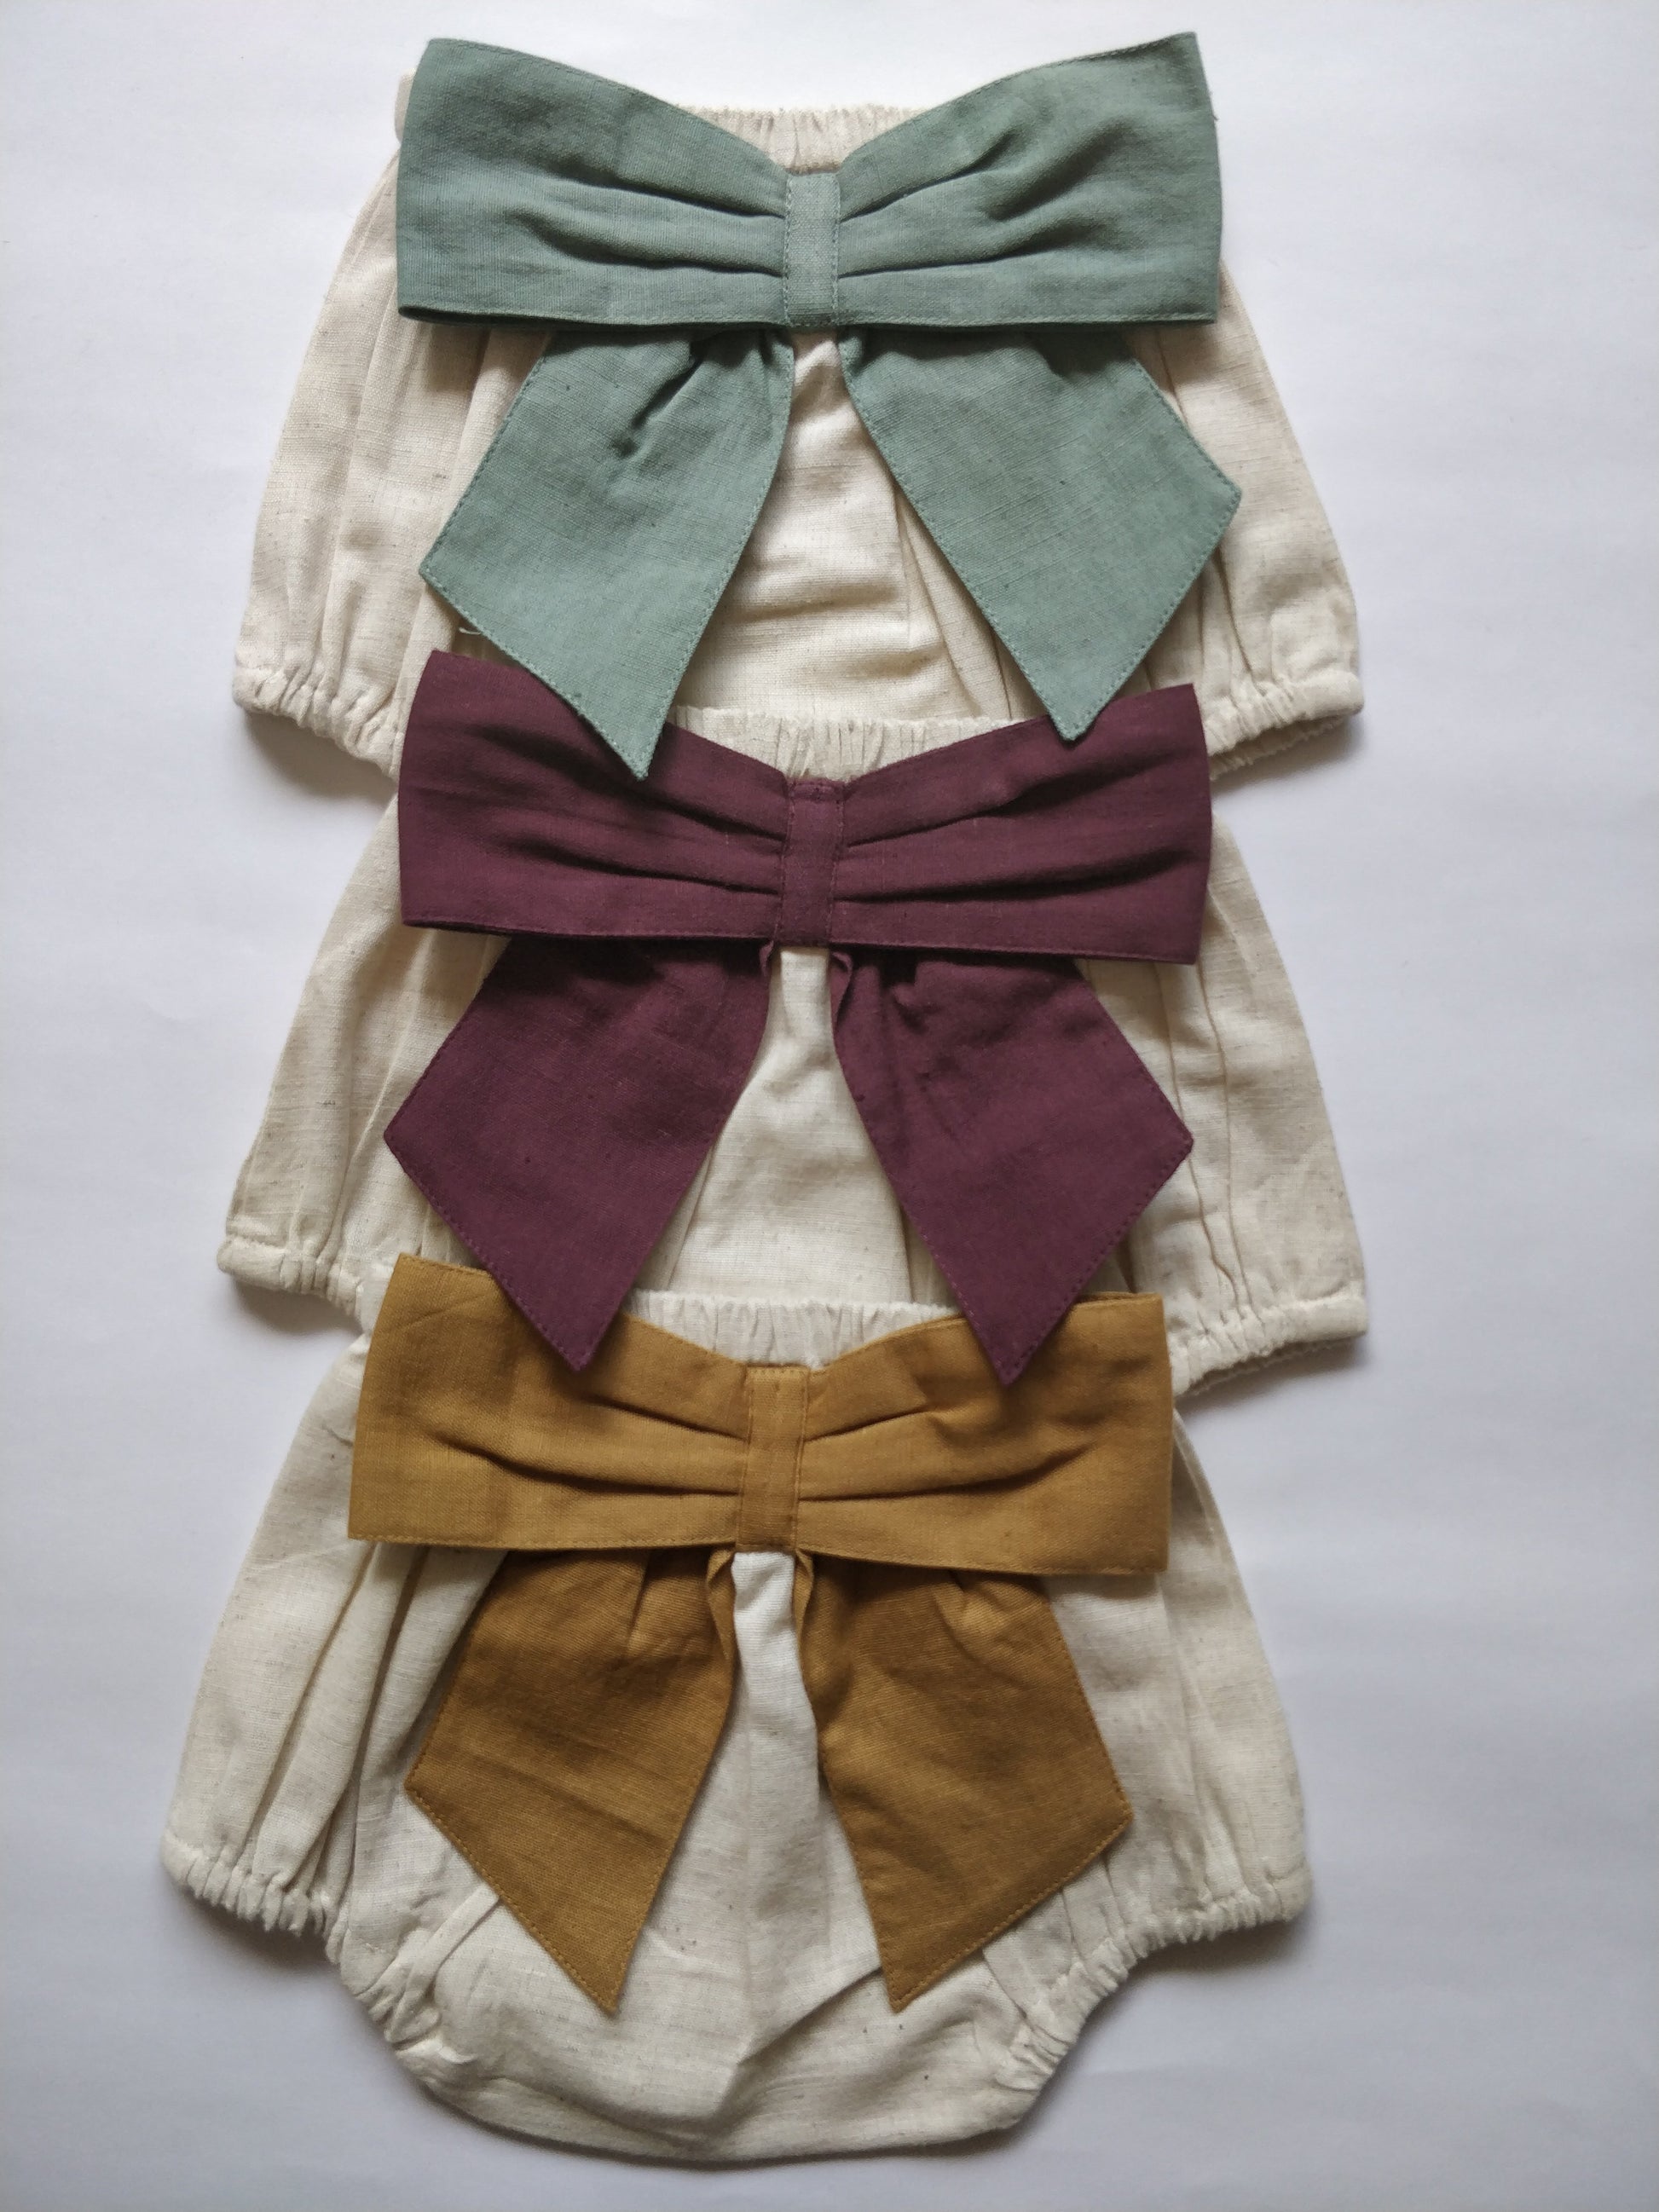 Set of 3 - Ivory Diaper Covers with Contrast Bows in Sage, Ochre & Burgundy.